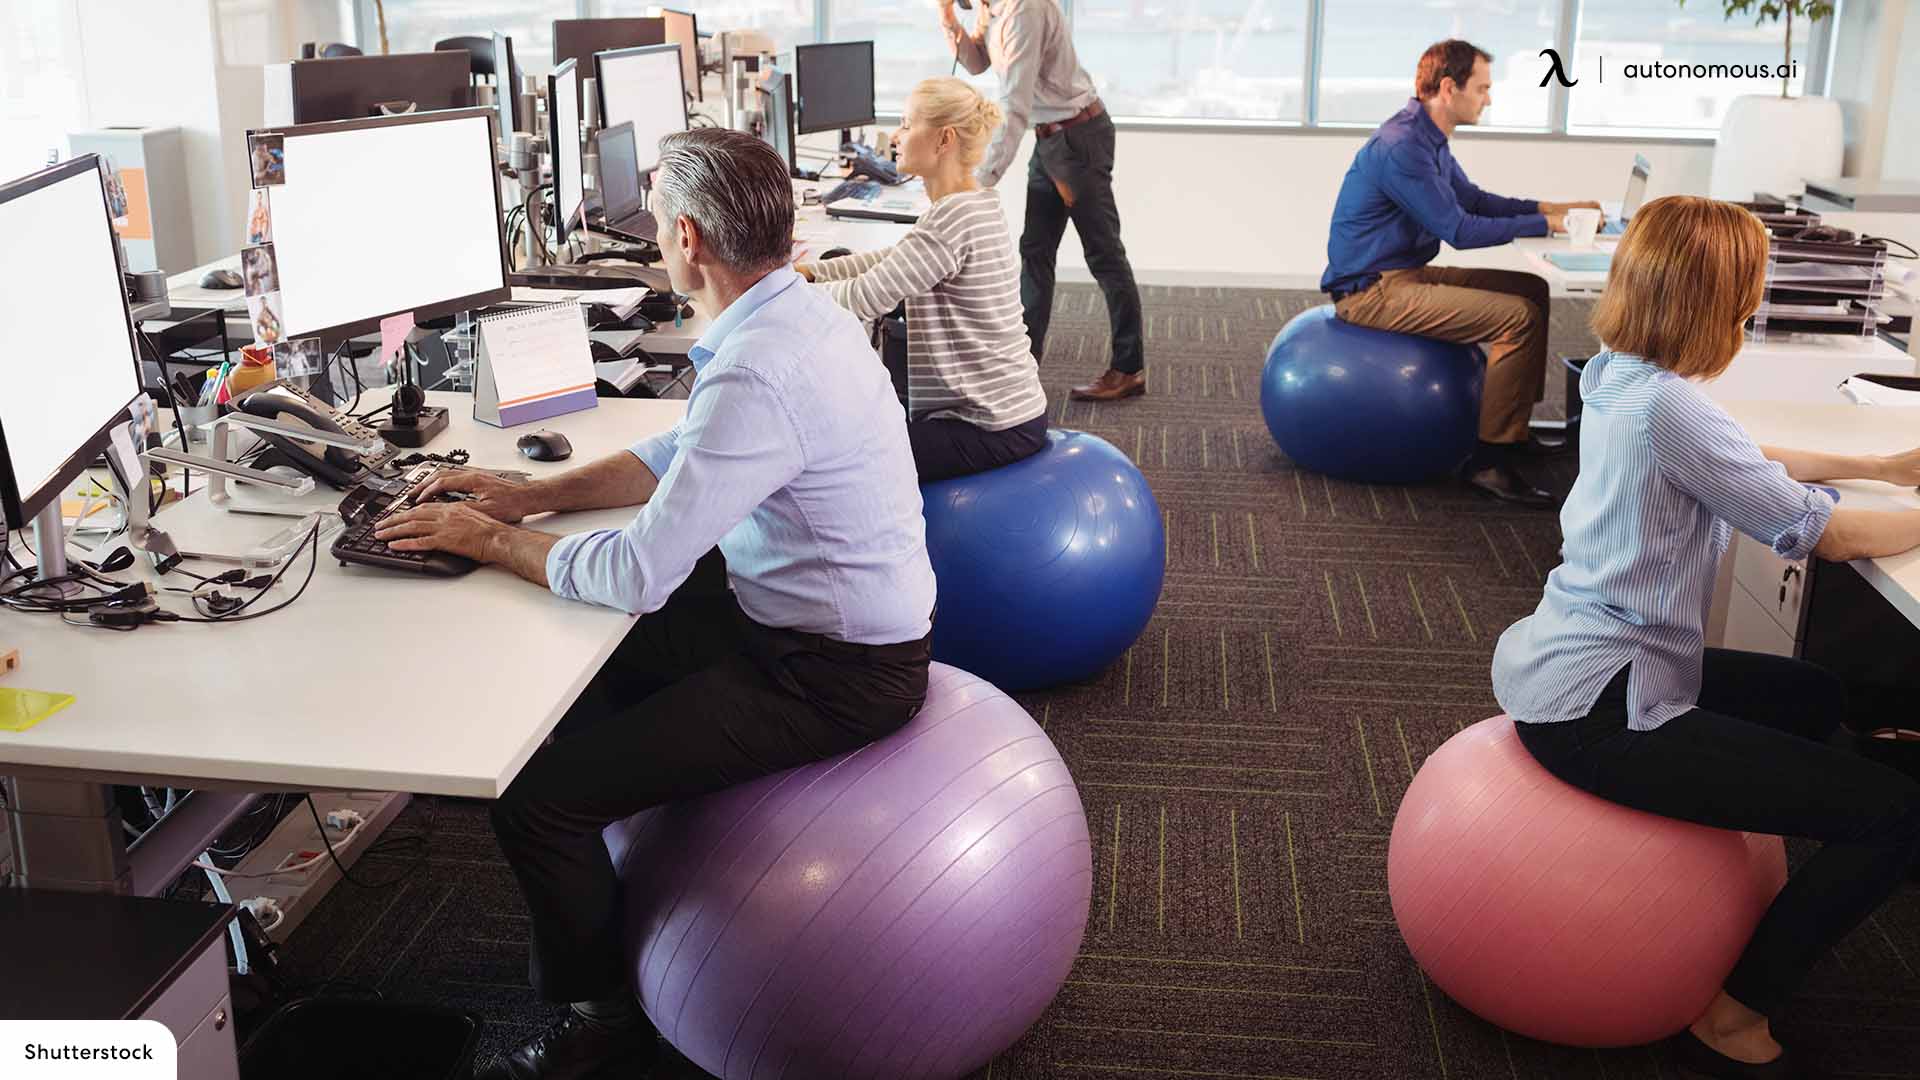 https://cdn.autonomous.ai/static/upload/images/common/upload/20211015/Pros-and-Cons-of-Sitting-on-a-Ball-Office-Chair-at-work_50f318f0eed.jpg